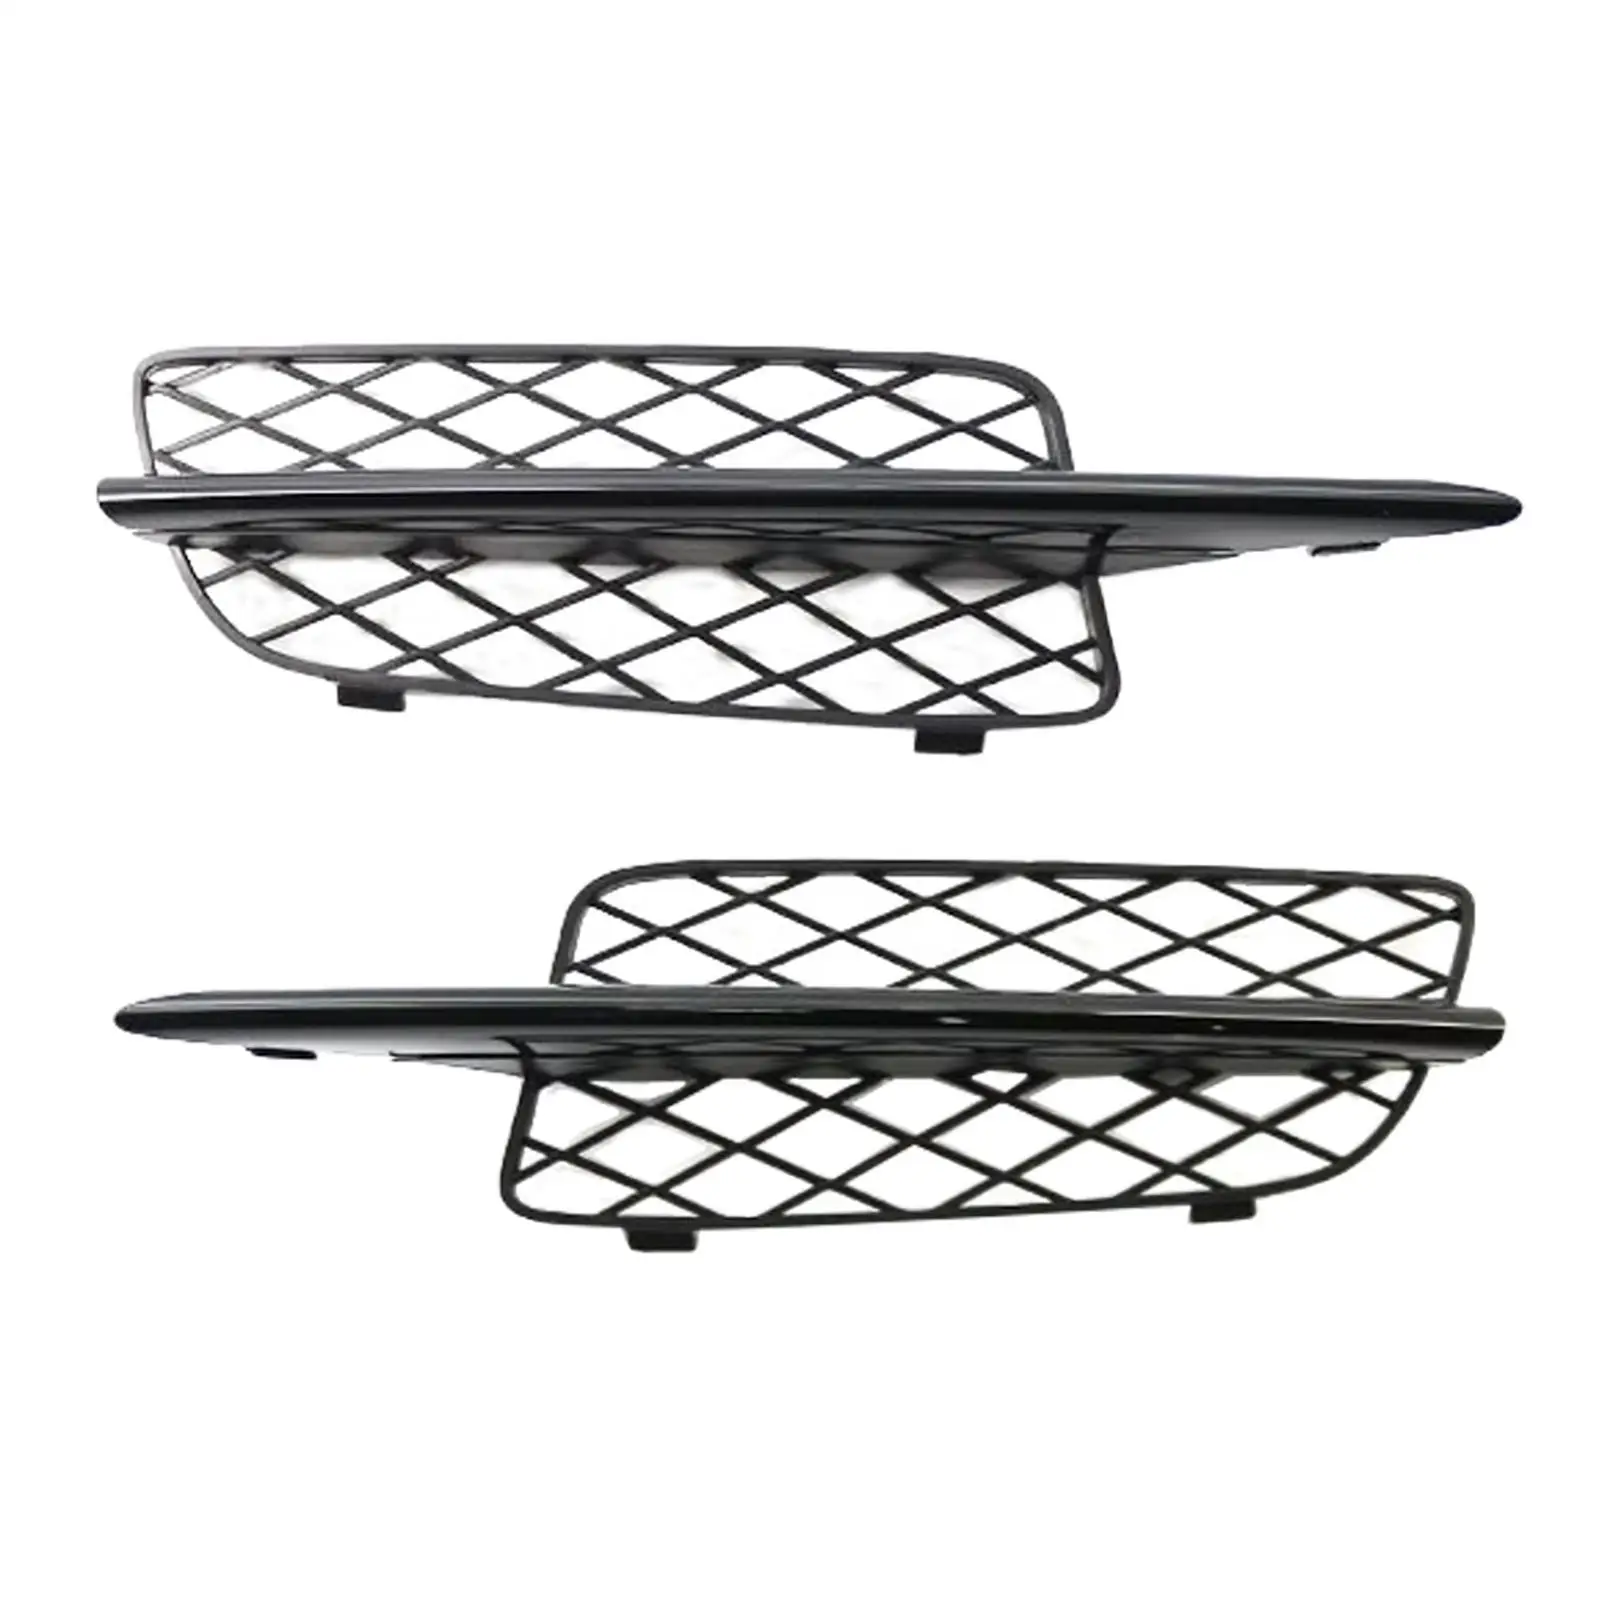 2x Car Front Bumper Lateral Grill Cover Accessories 51117159595 51117159596 Fit for BMW x5 E70 2008 2009 2010